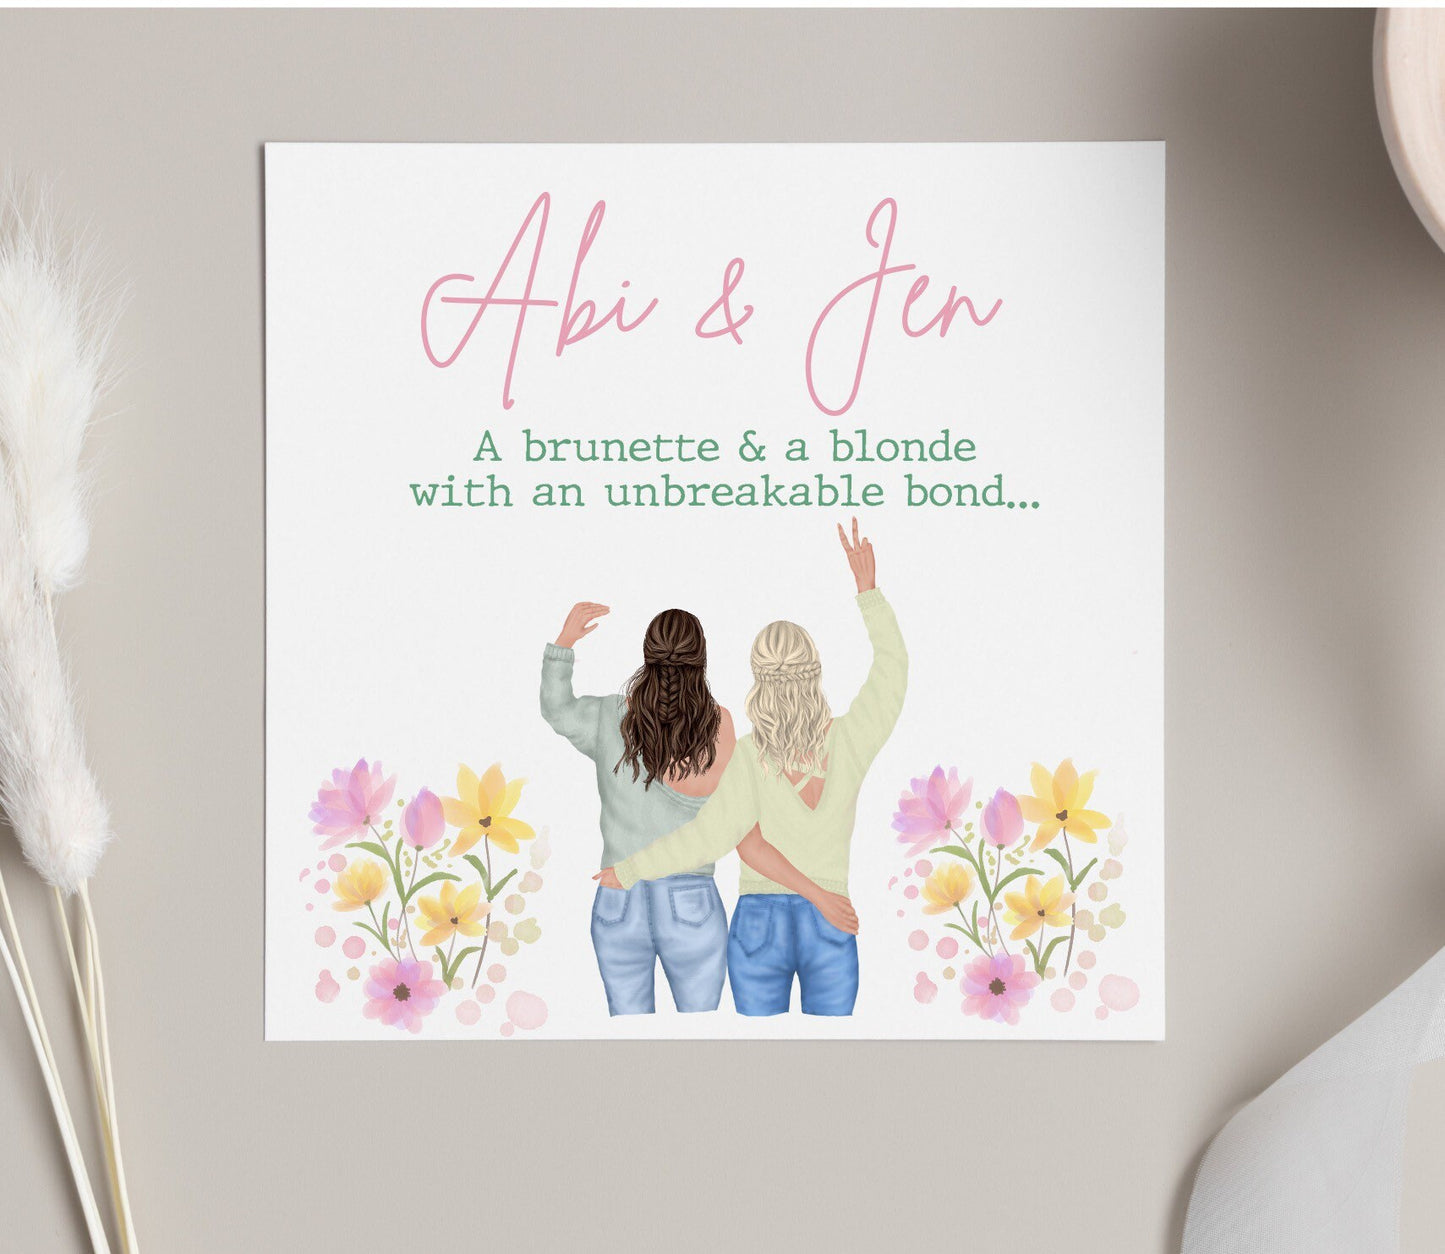 Brunette and blonde with an unbreakable bond, girly friendship cards for besties birthday, miss you friend card, floral pretty design